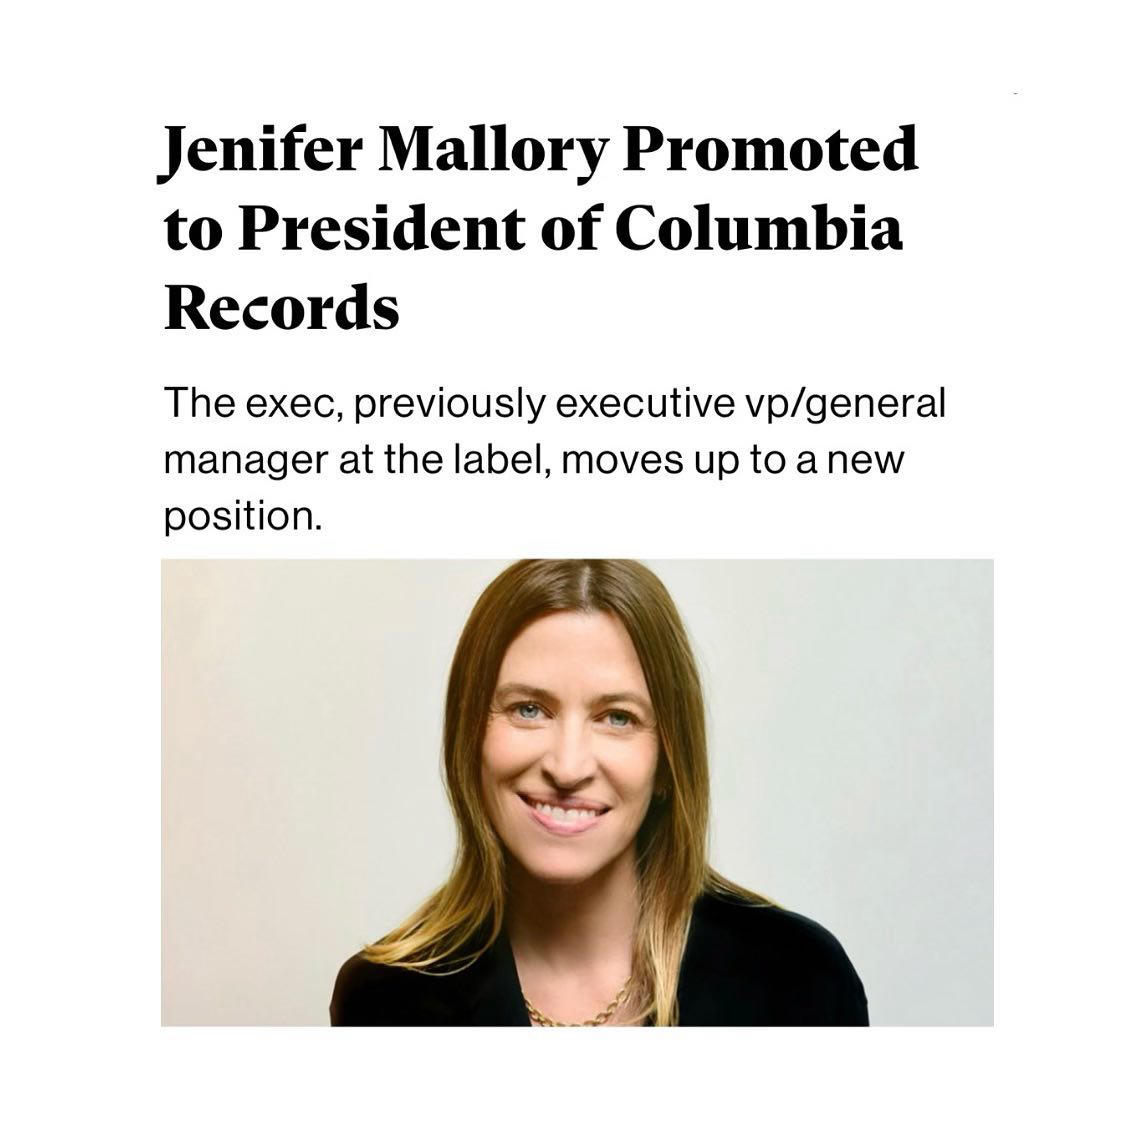 Jenifer Mallory has been promoted to President of Columbia Records as announced today by Columbia’s